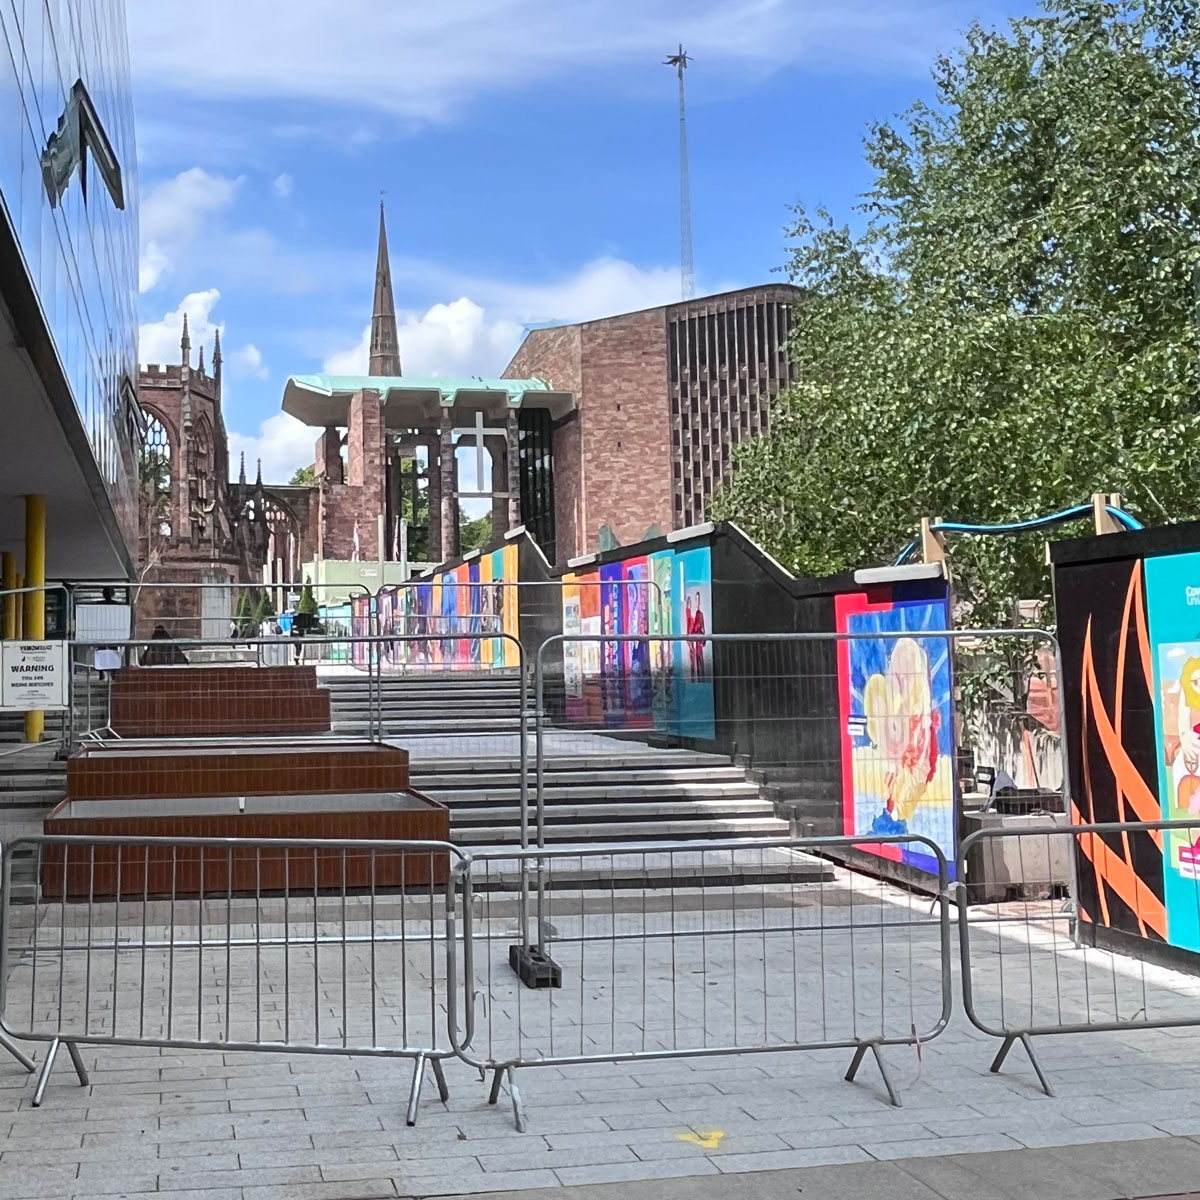 (2/2) Vice-Chancellor Professor John Latham CBE says 'Our programme of work shows commitment to our mission of creating better futures and delivering transformational change for our students, partners and communities.'  #Coventry #PublicRealm #Redevelopment #Regeneration